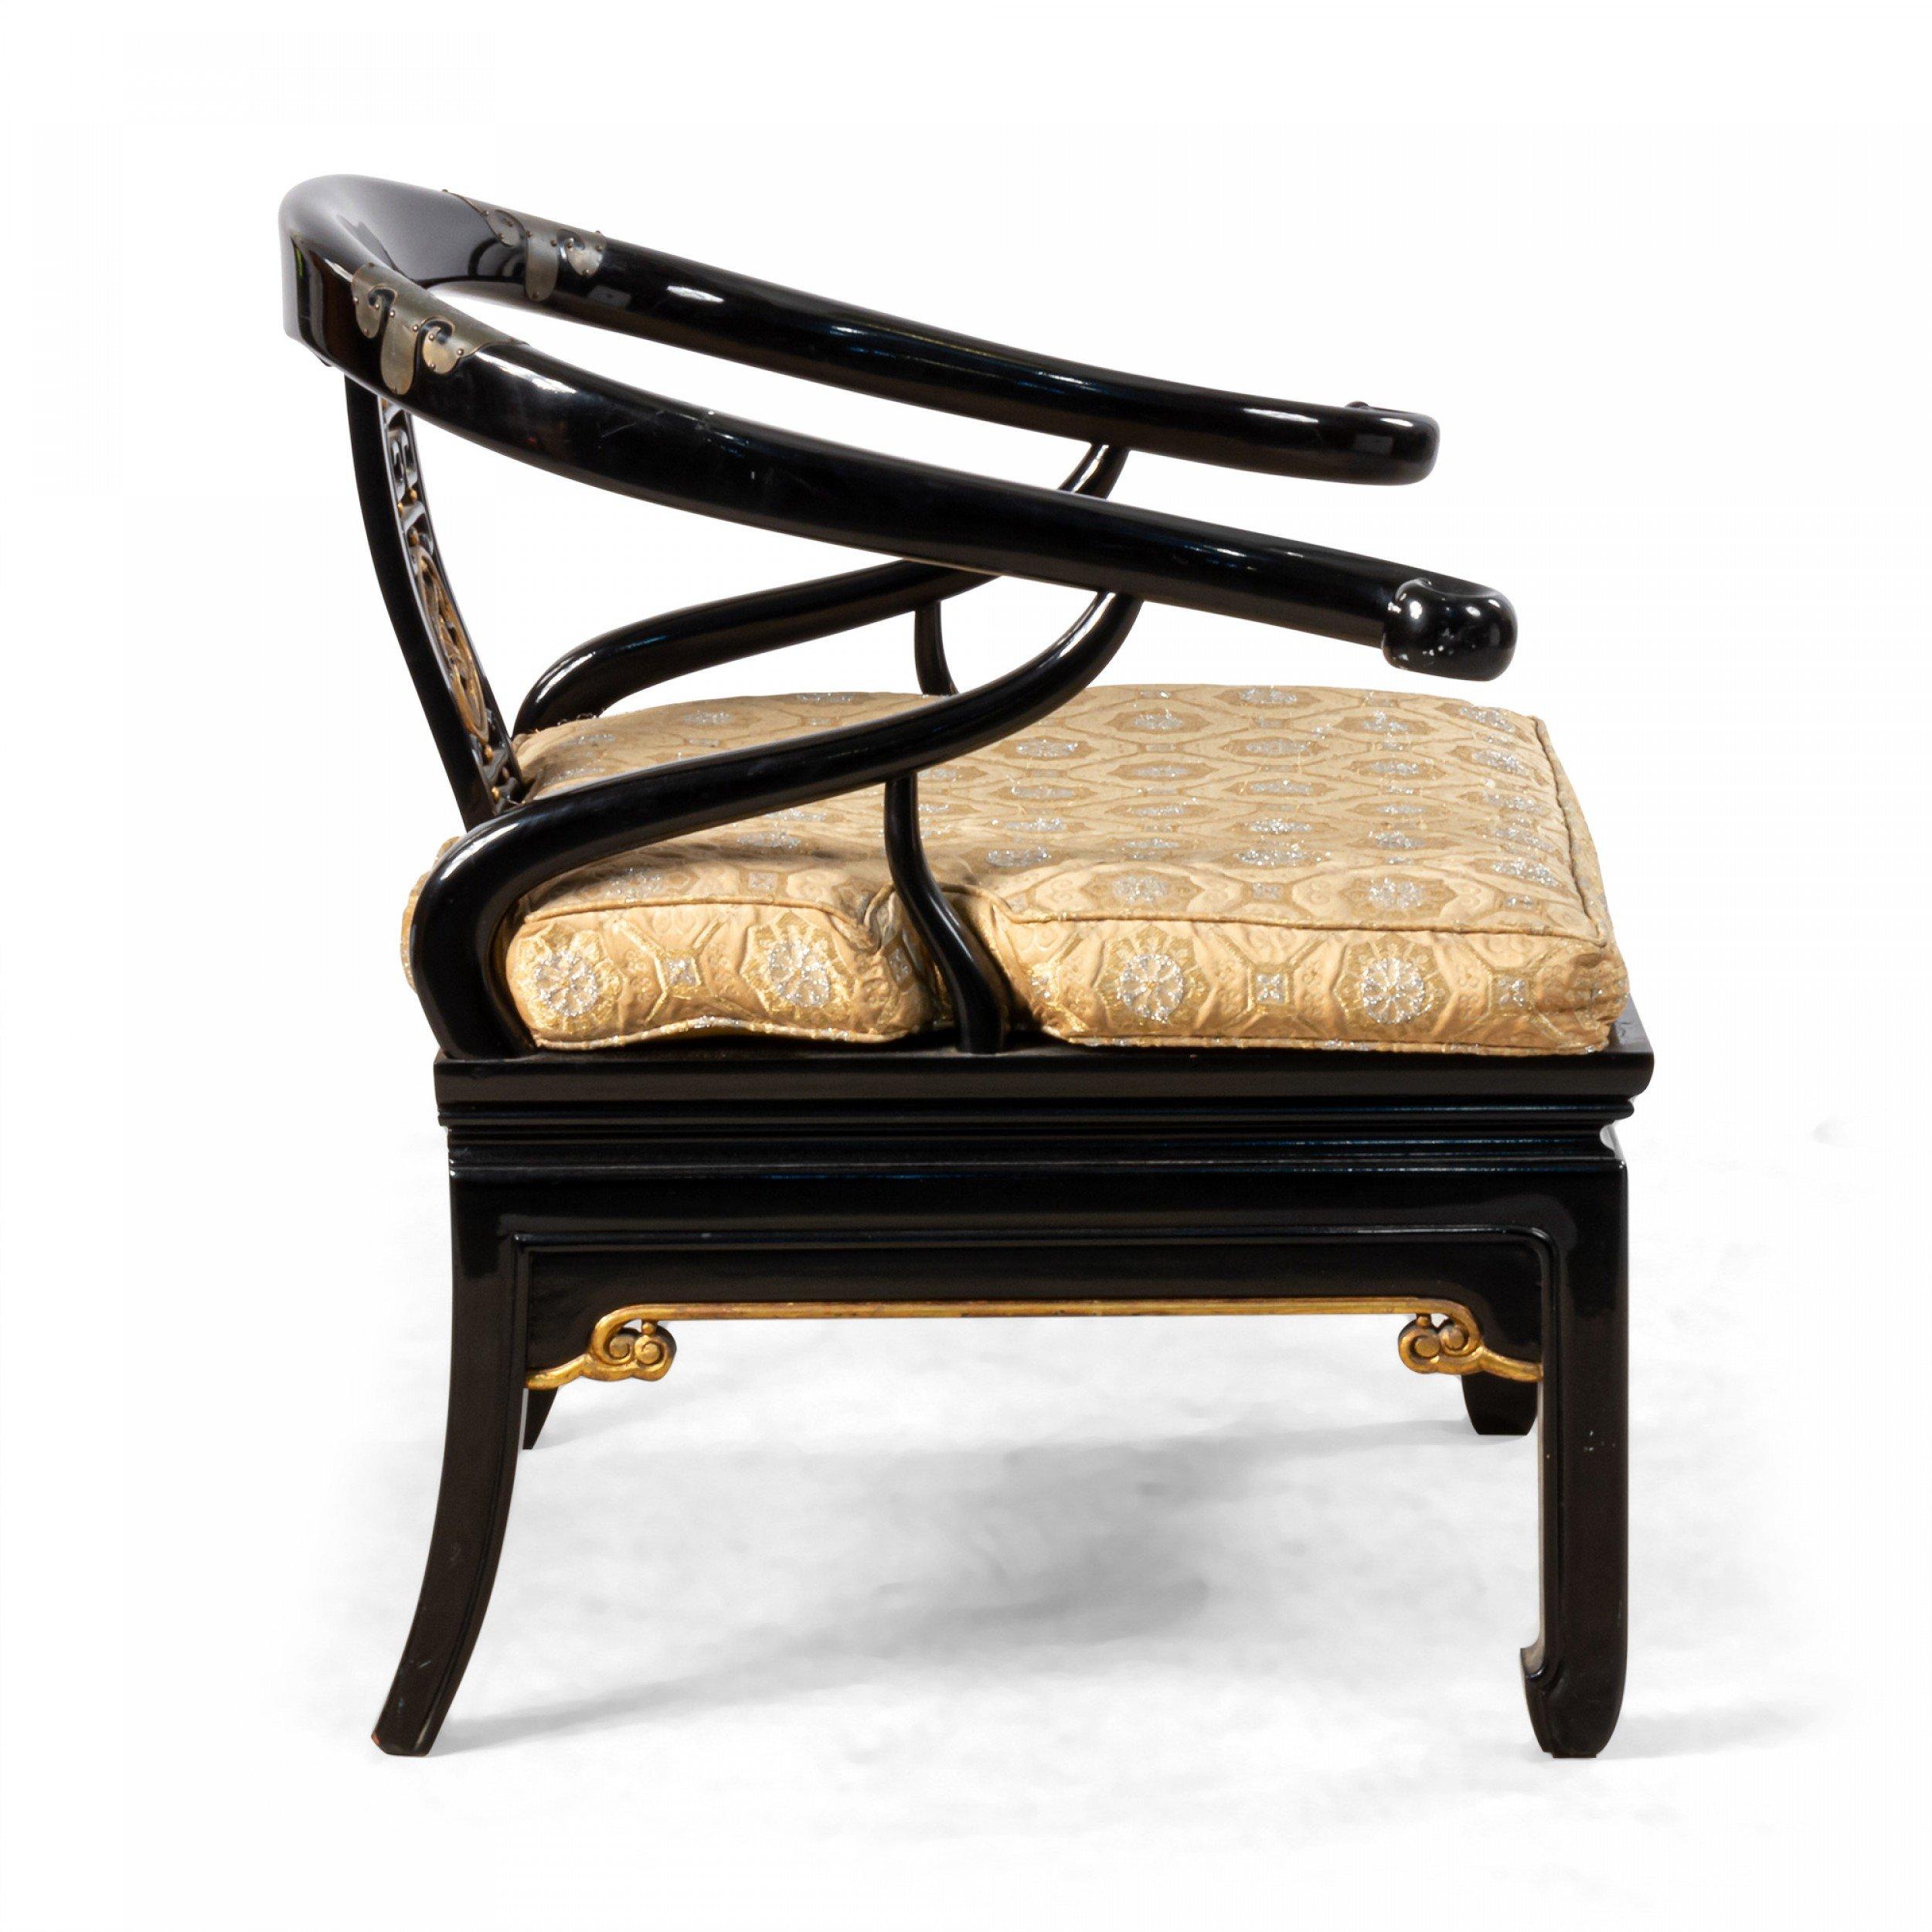 Pair of Chinese Regency style lacquered horse shoe armchairs in the style of James Mont with gilt ornamentation along frame and an elaborate decorative pierced back slat.